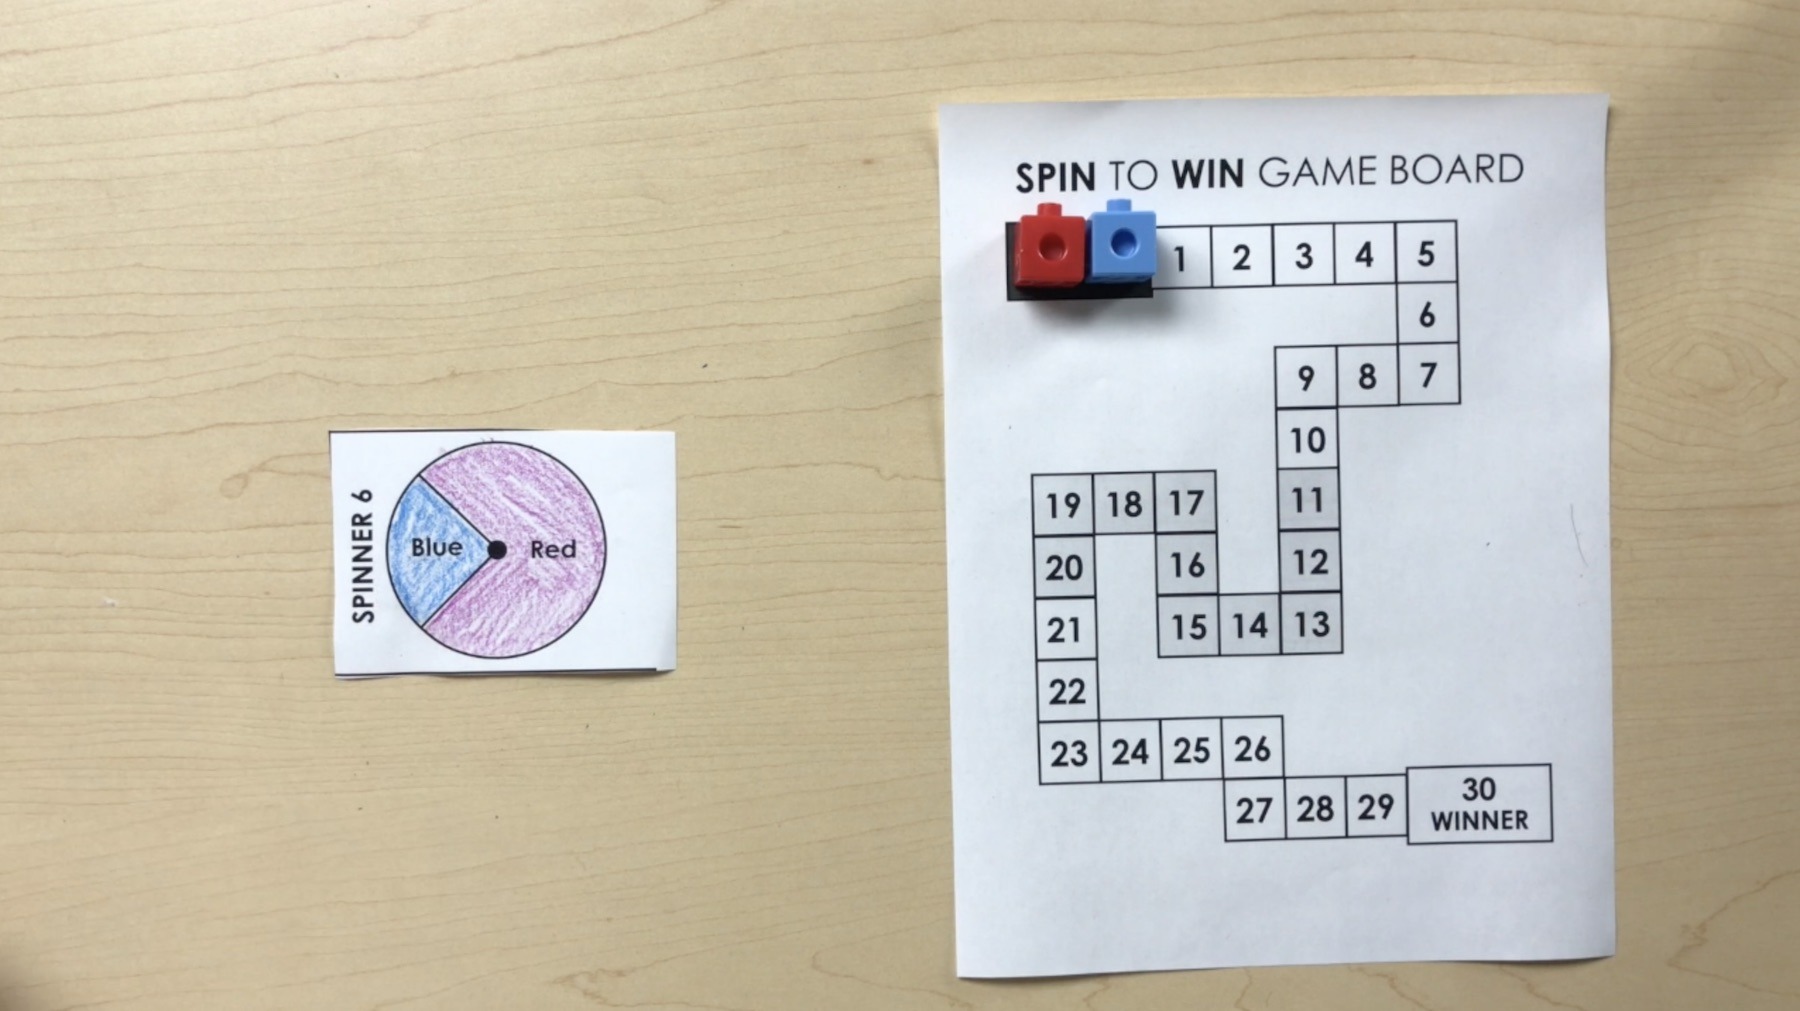 Spin to Win Sequel - Spinner 6 Act 2 co